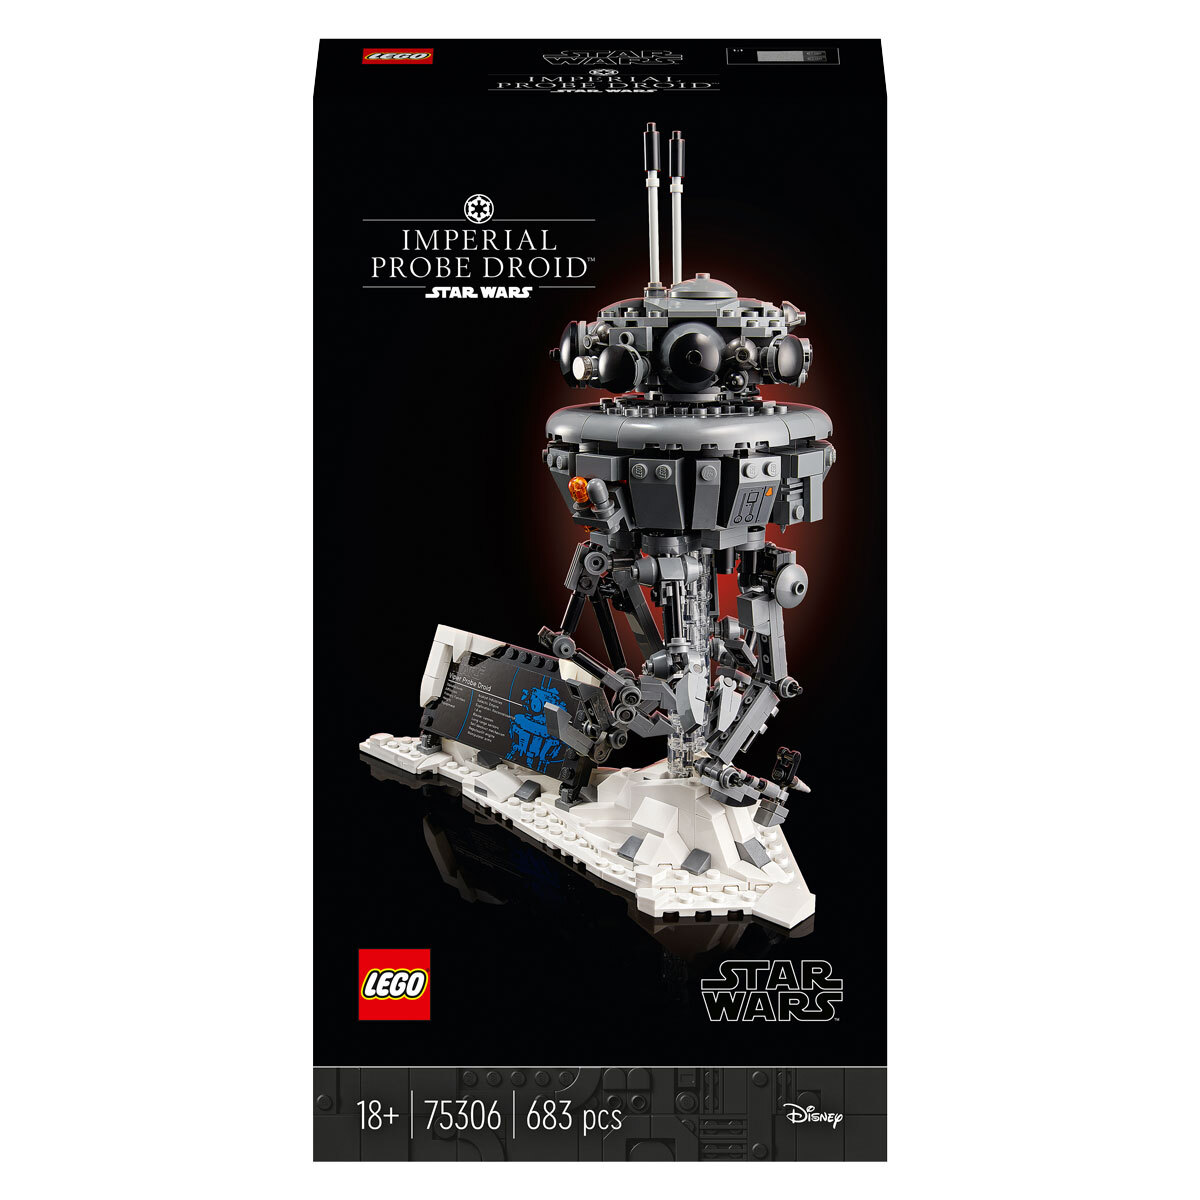 Buy LEGO Imperial Probe Droid Model 75306 Front of Box Image at Costco.co.uk